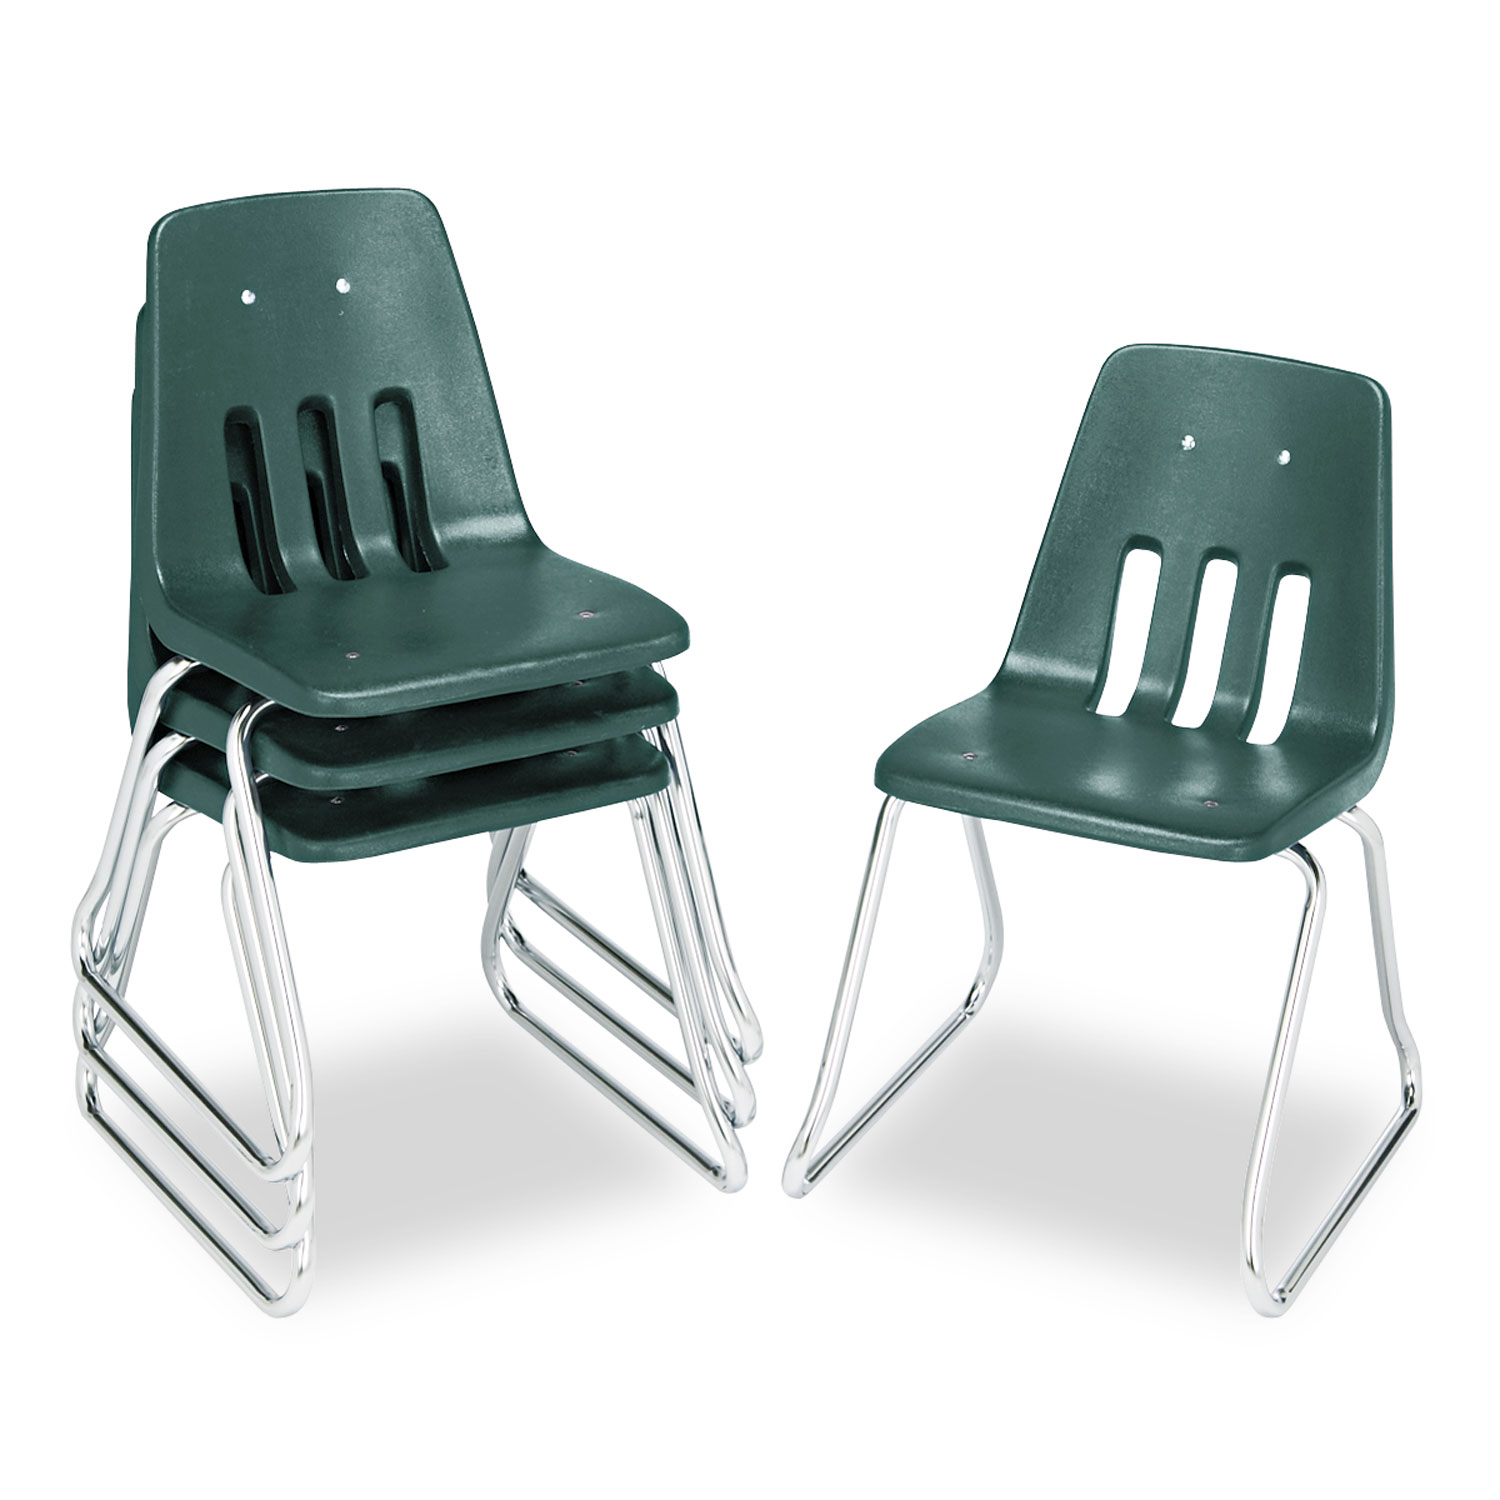 9600 Classic Series Classroom Chairs, 18 Seat Height, Forest Green/Chrome, 4/CT